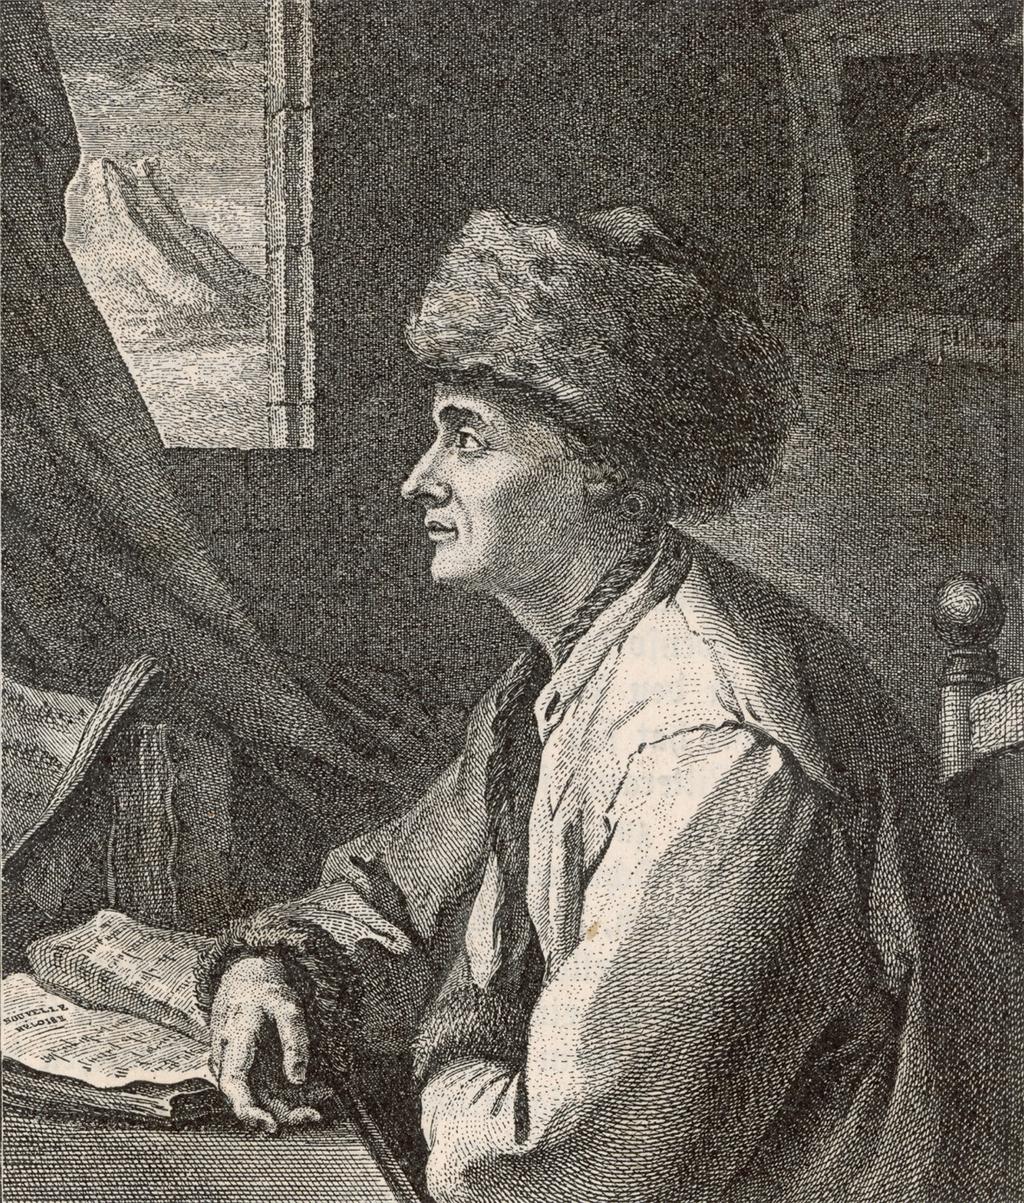 In this image of Rousseau sitting at his desk in Neufchatel, Switzerland, the writer wears his favorite Armenian hat, which became